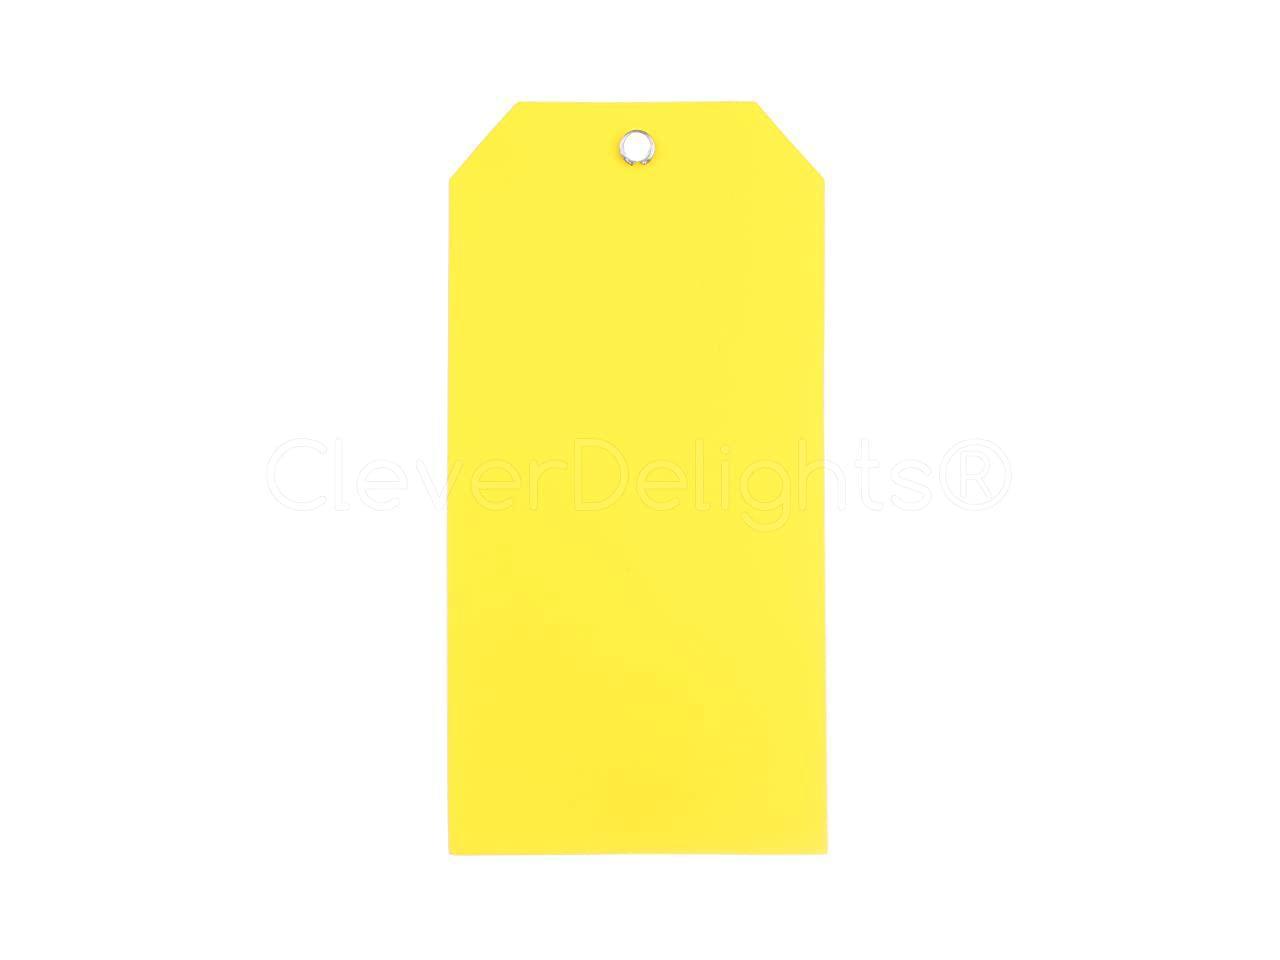 Tear-Proof and Waterproof 4.75" x 2.375" In Yellow Plastic Tags 200 Pack